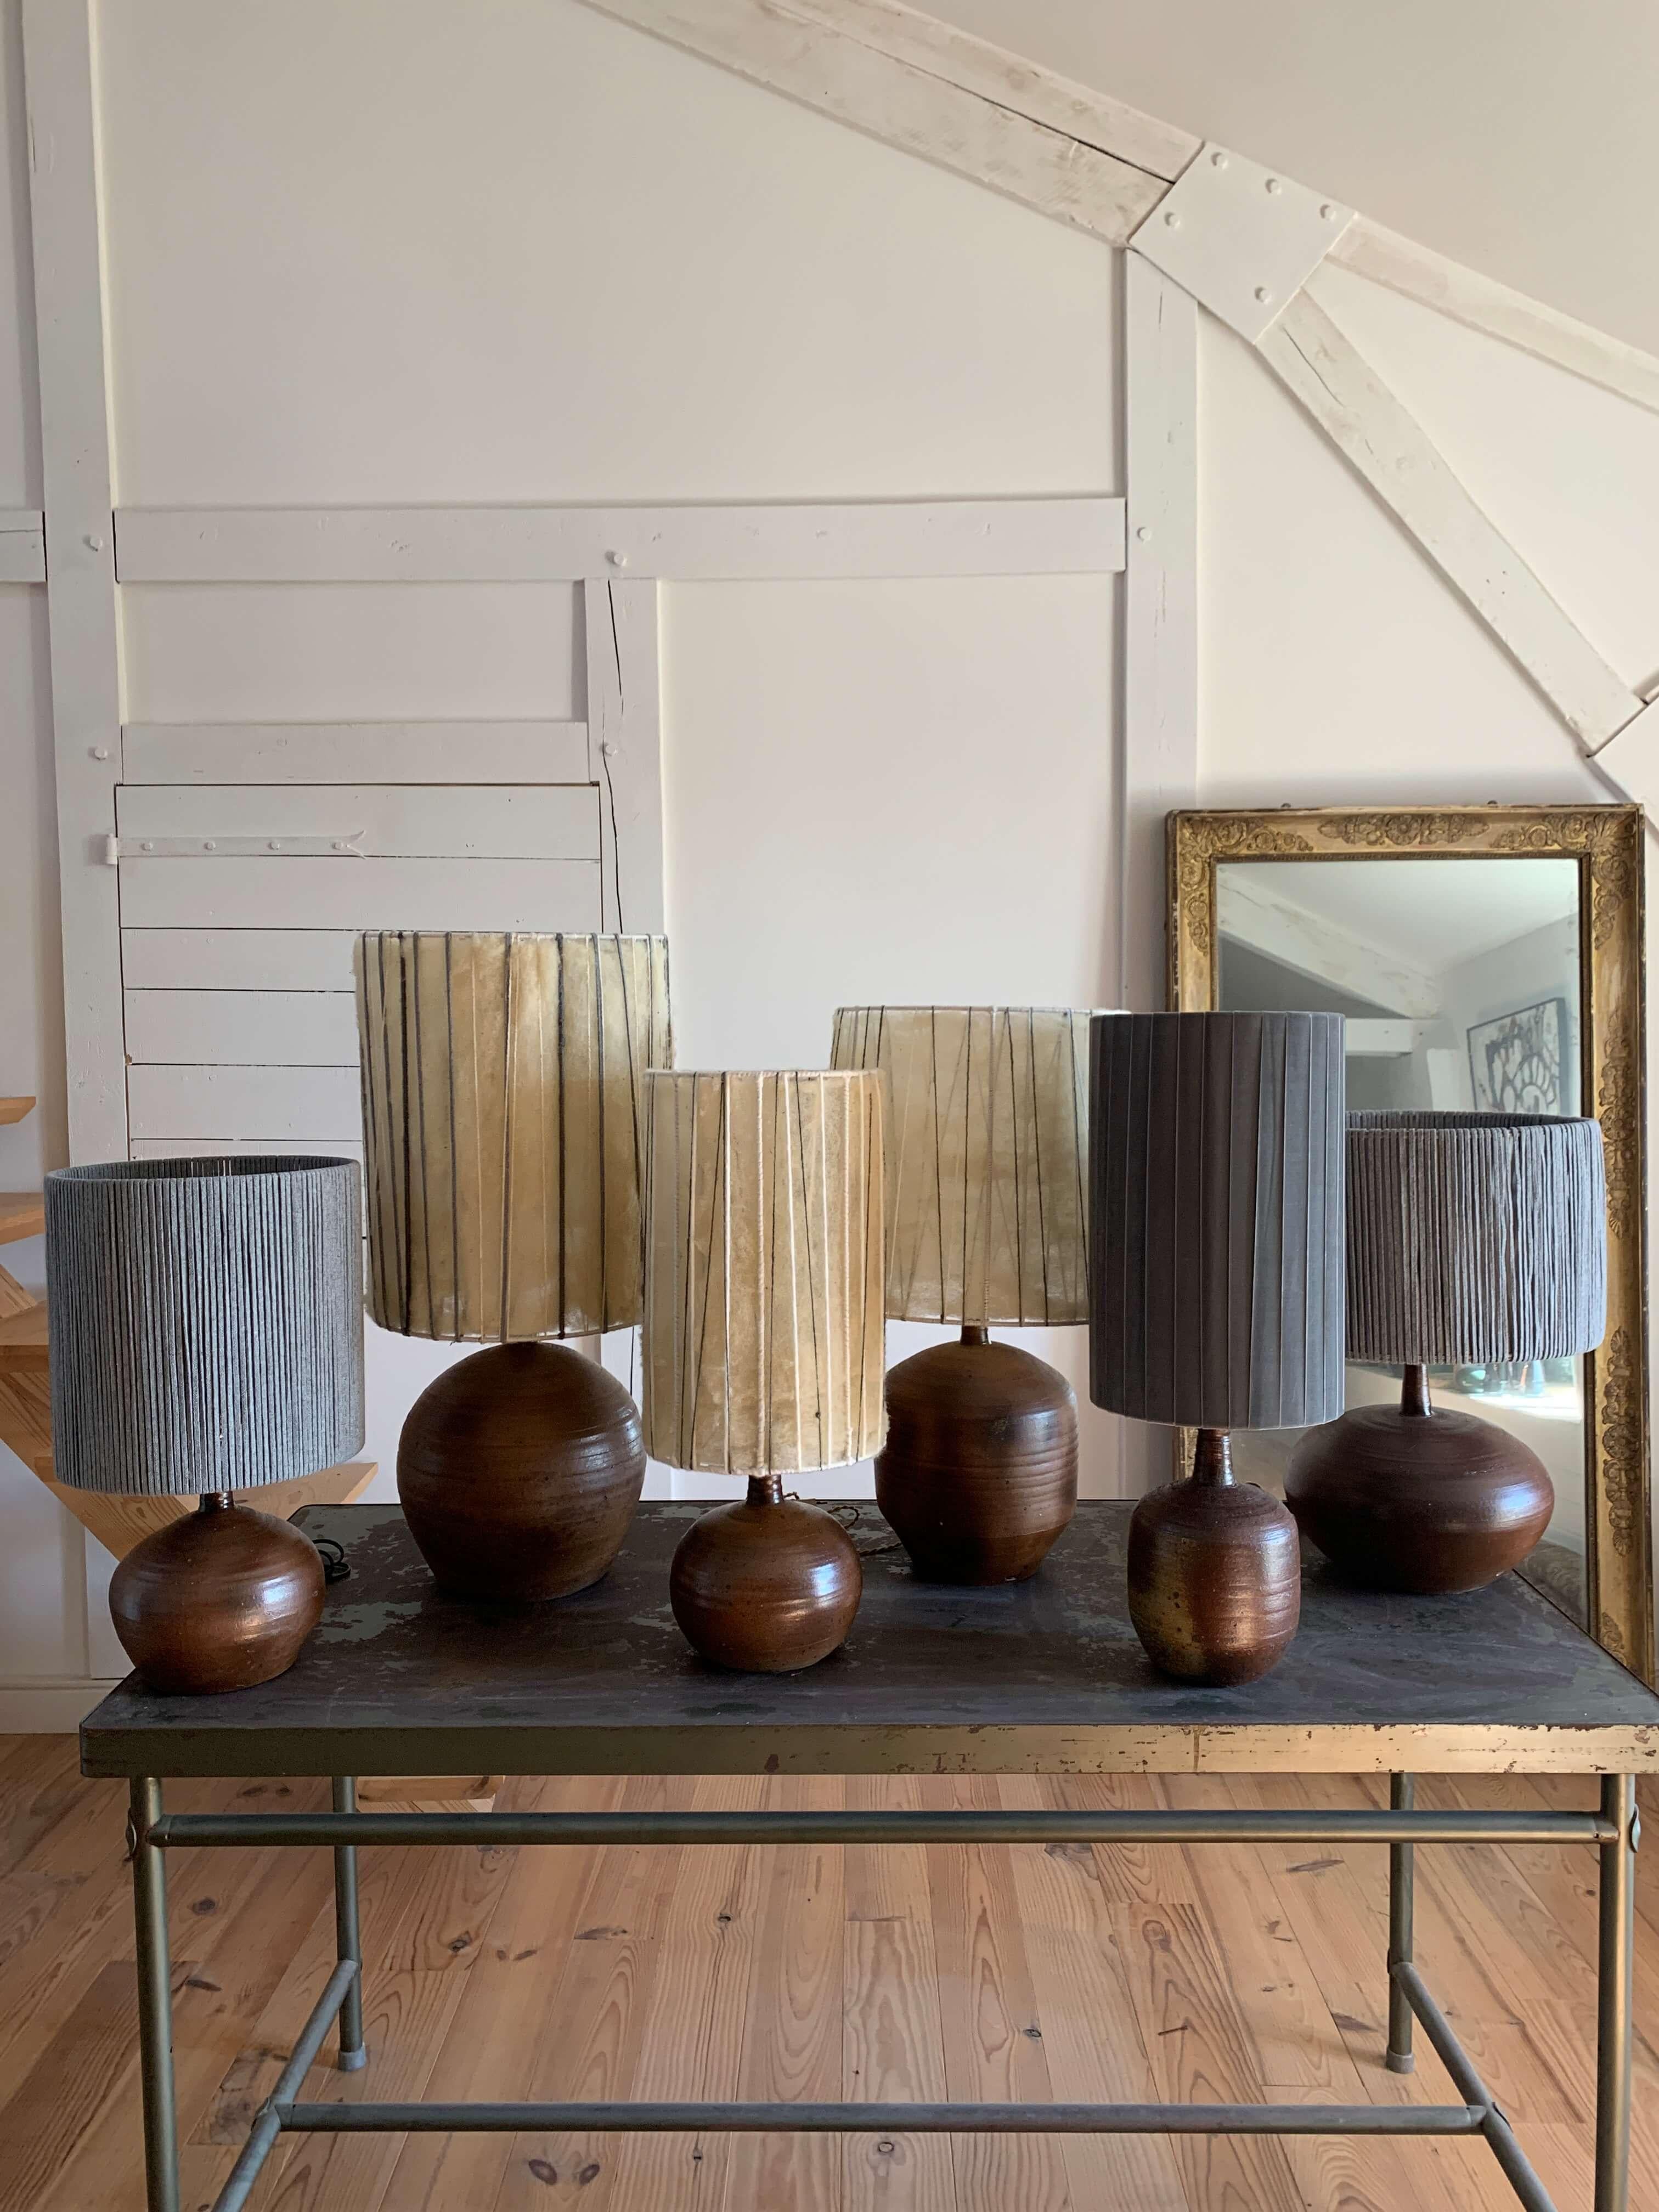 Janet Stedman (1945-1987) & Pierre Digan (1941-2016)

Renowned artists from the famous center of La Borne, France.
Set of six turned sandstone lamps, fired in a wood fire with an ash effect. Sold with custom-made lampshades created by a French